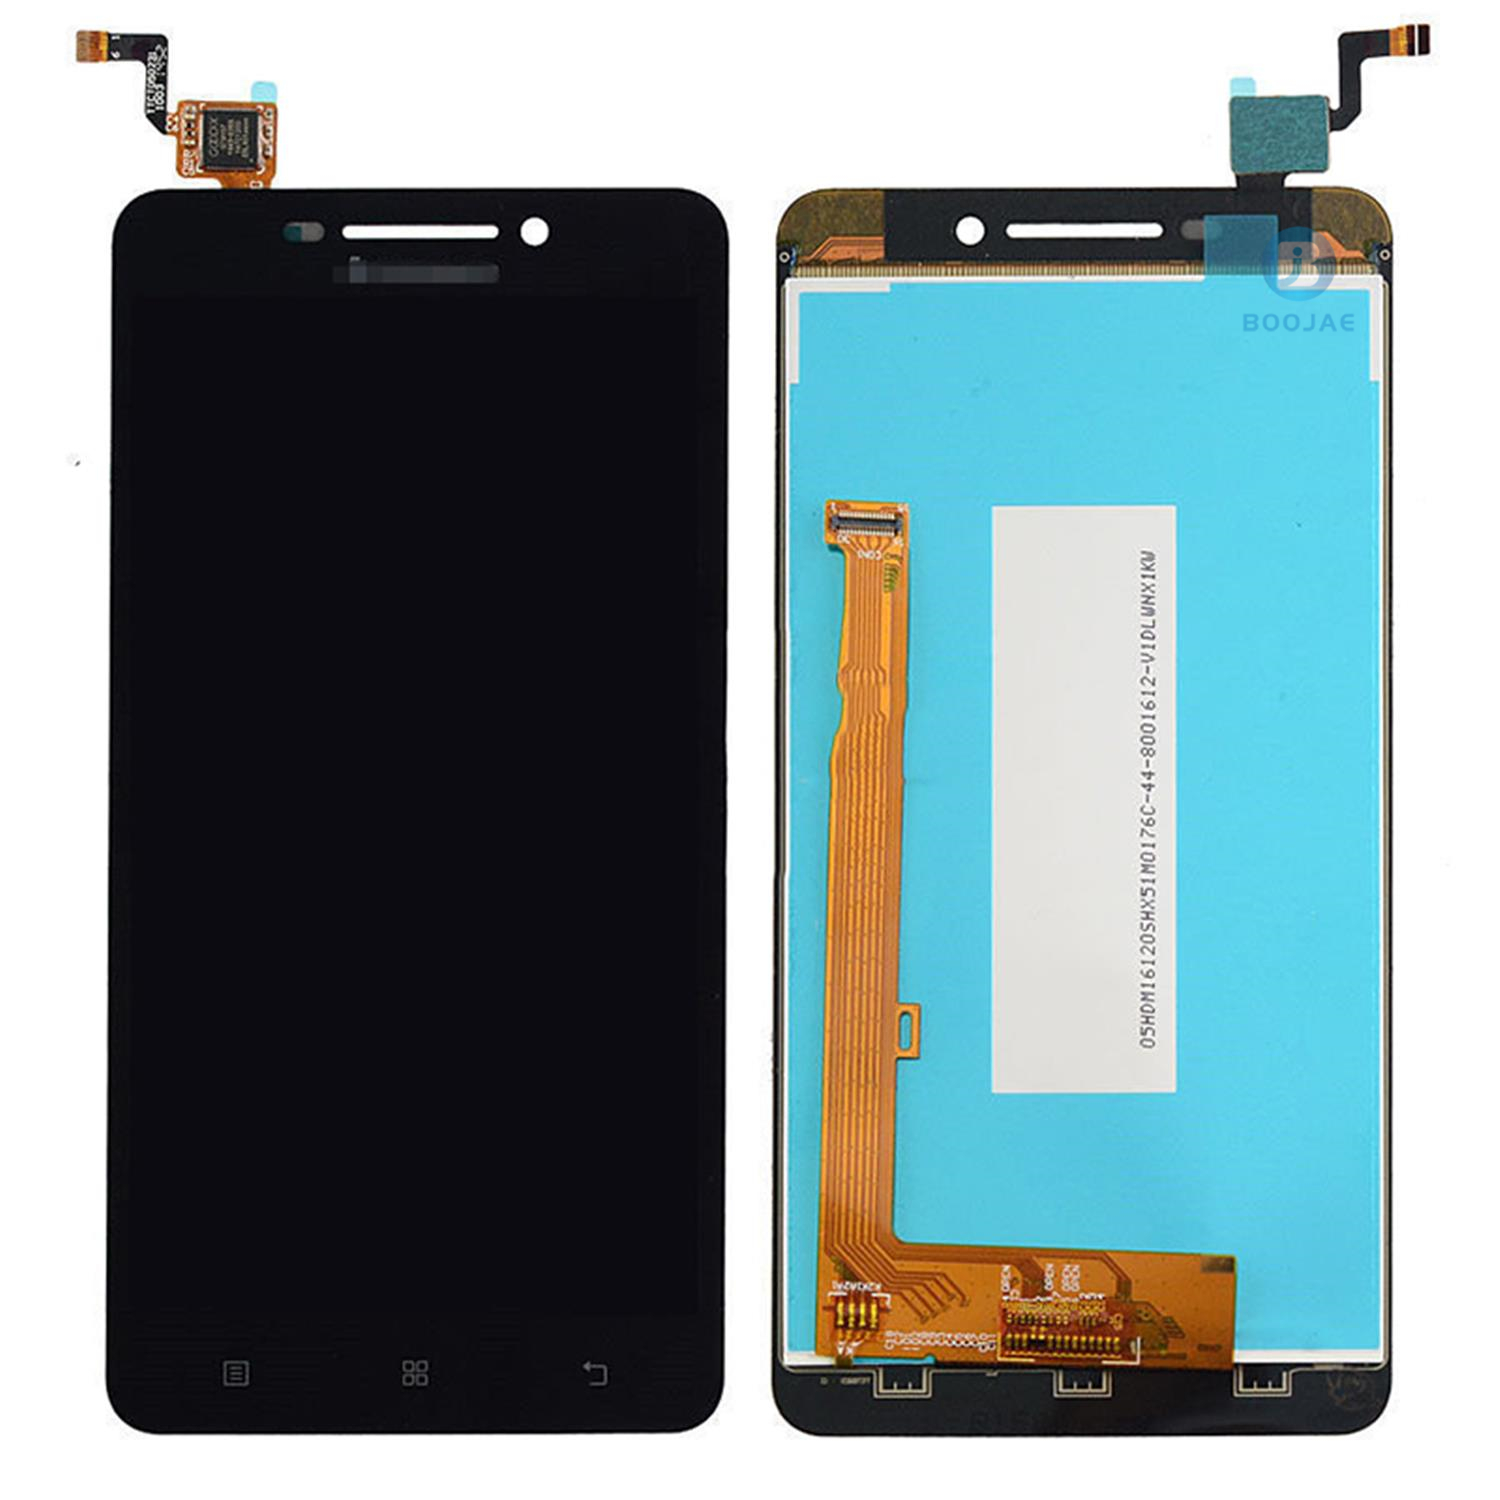 For Lenovo A5000 LCD Screen Display and Touch Panel Digitizer Assembly Replacement